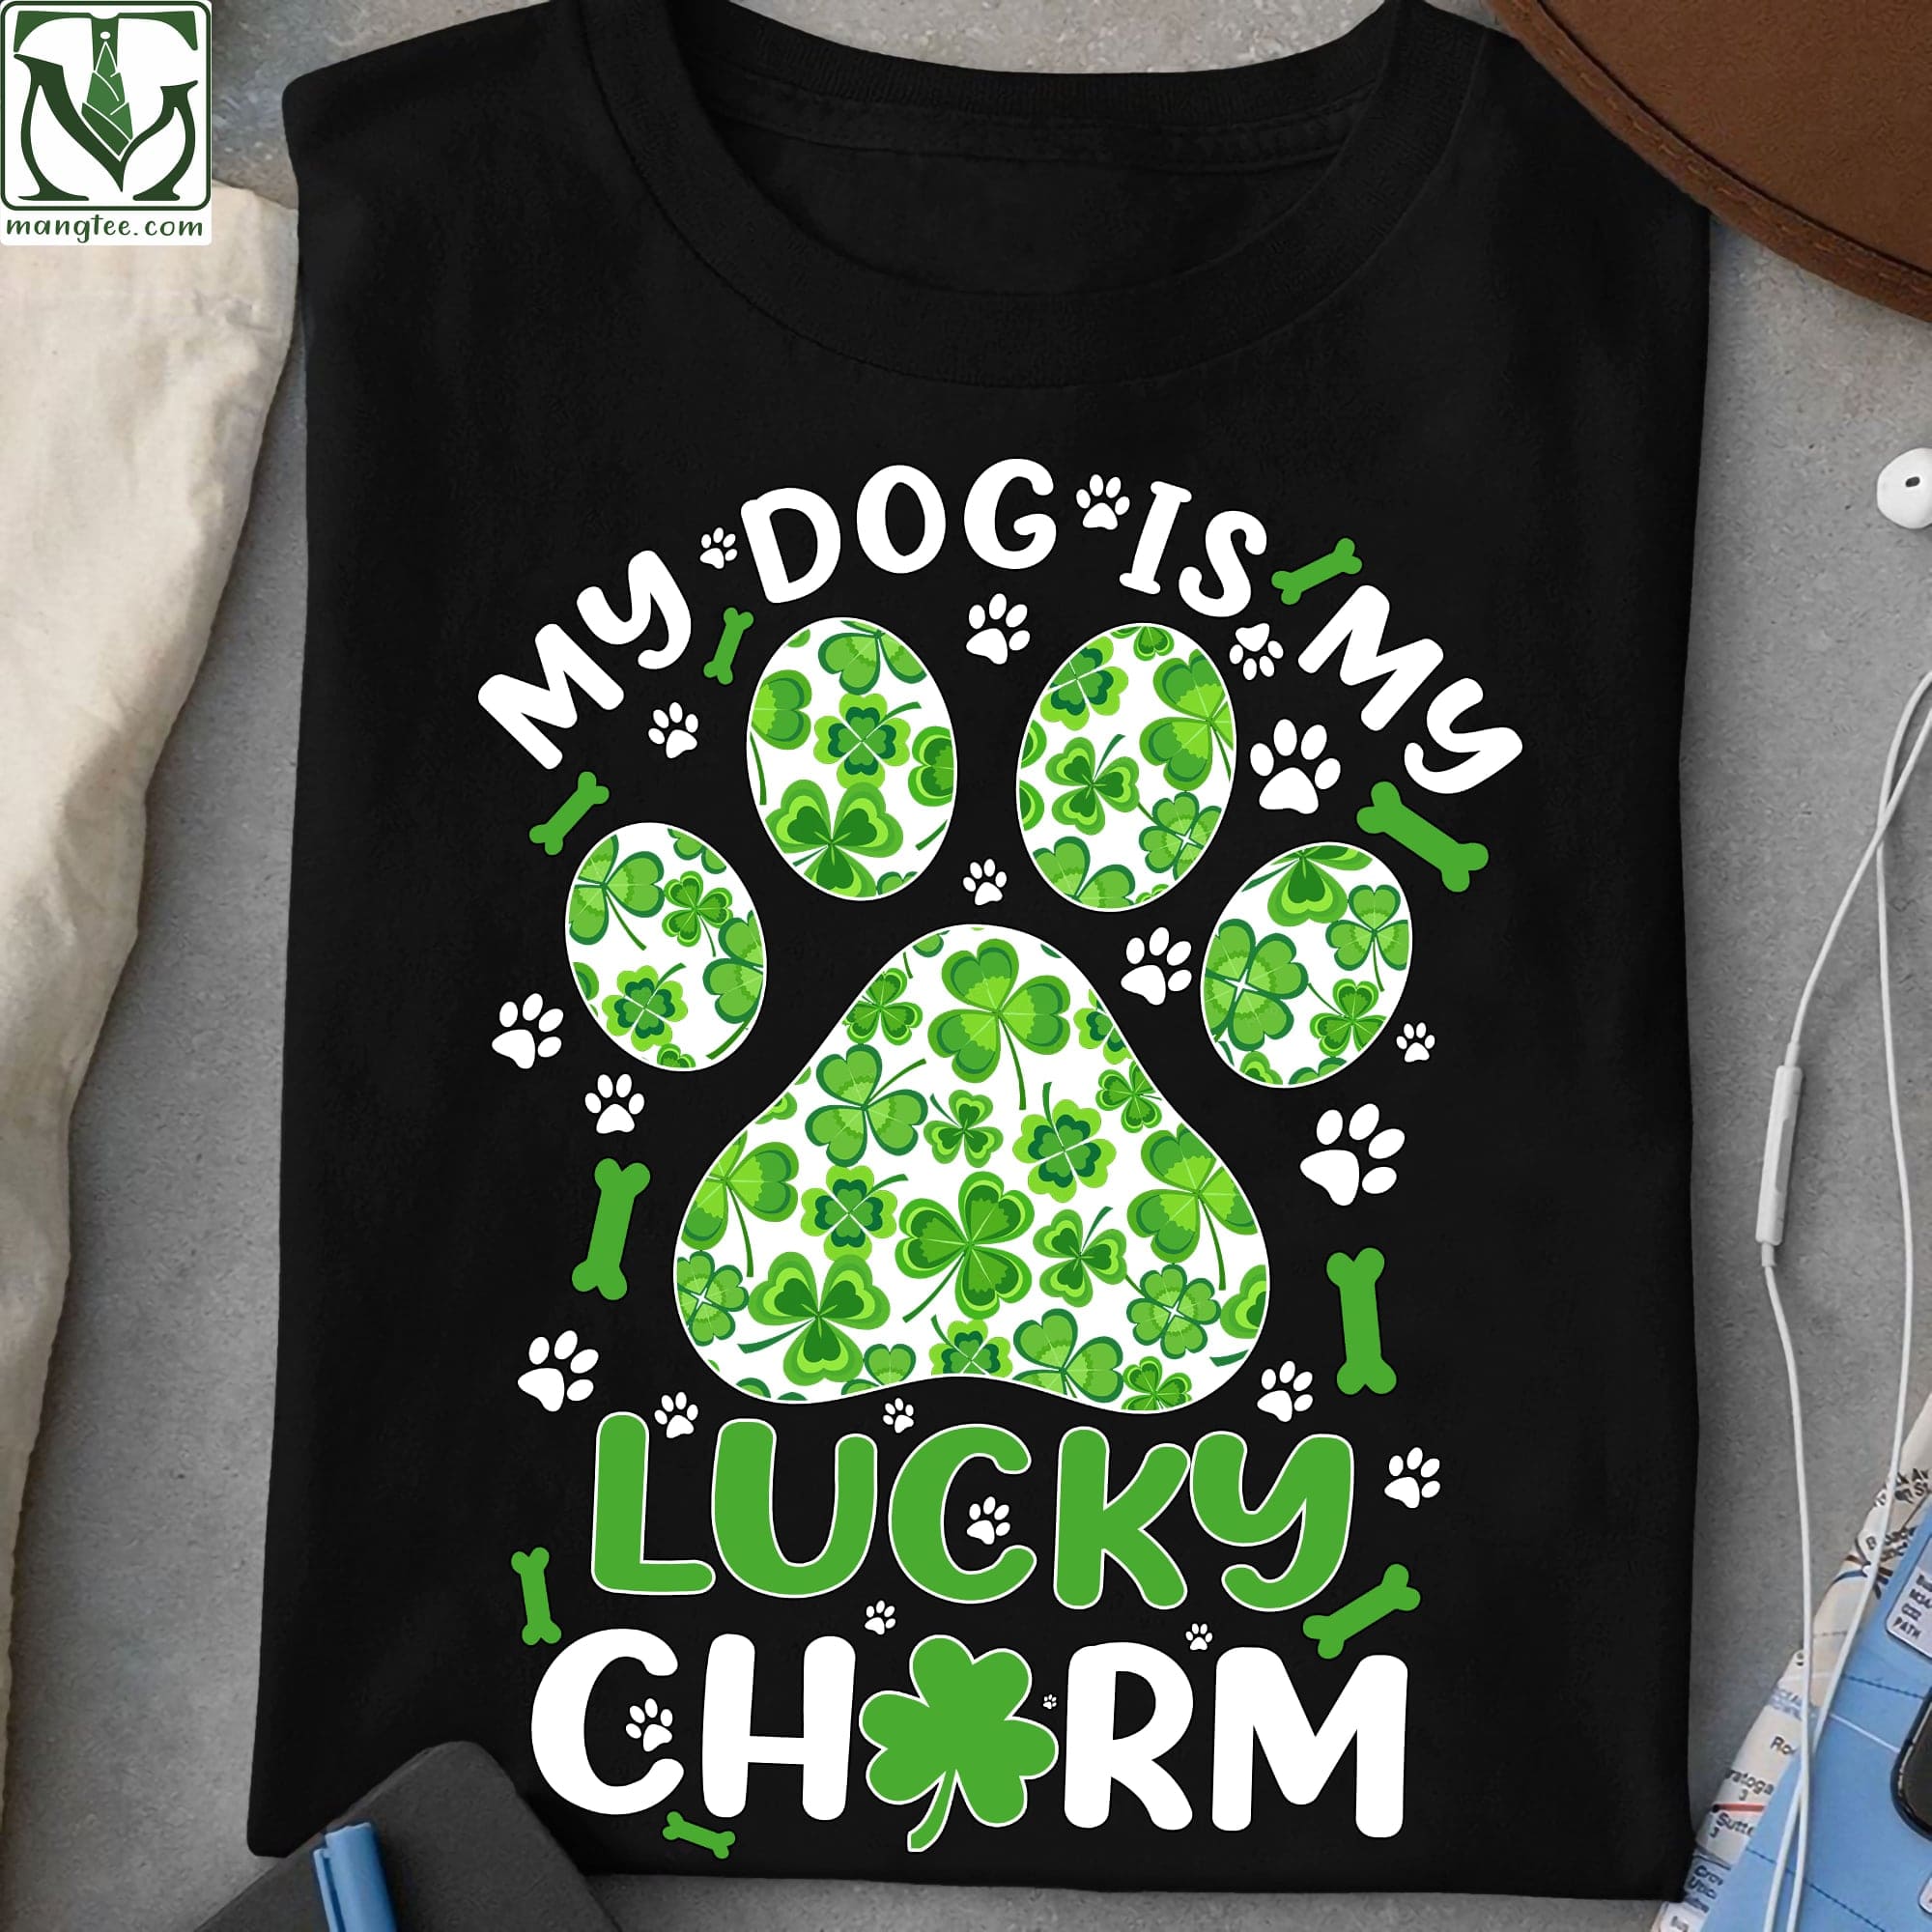 My dog is my lucky charm - Dog footprint, St Patrick's day, gift for Irish